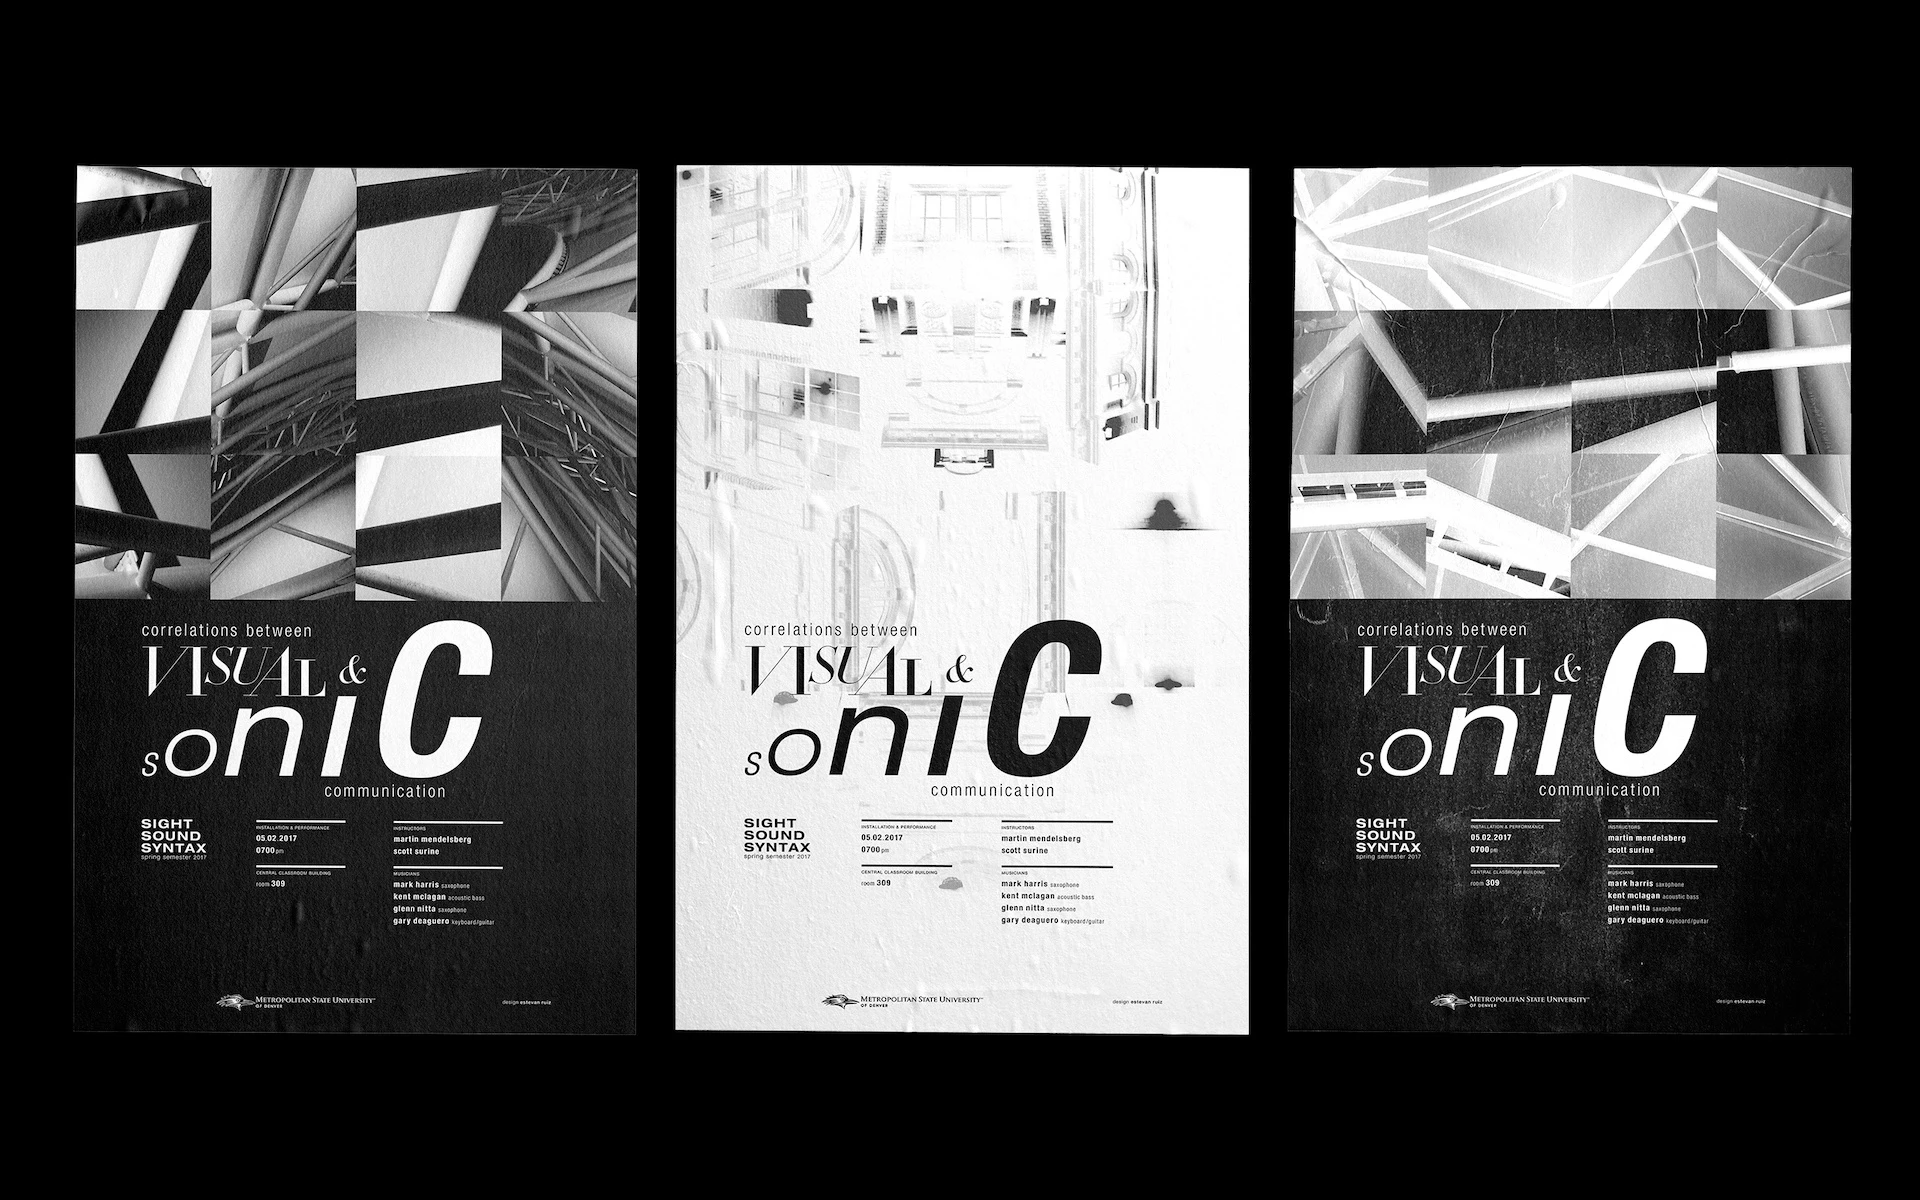 Series of three posters featuring black and white abstract photography grids and expressive dynamic-text